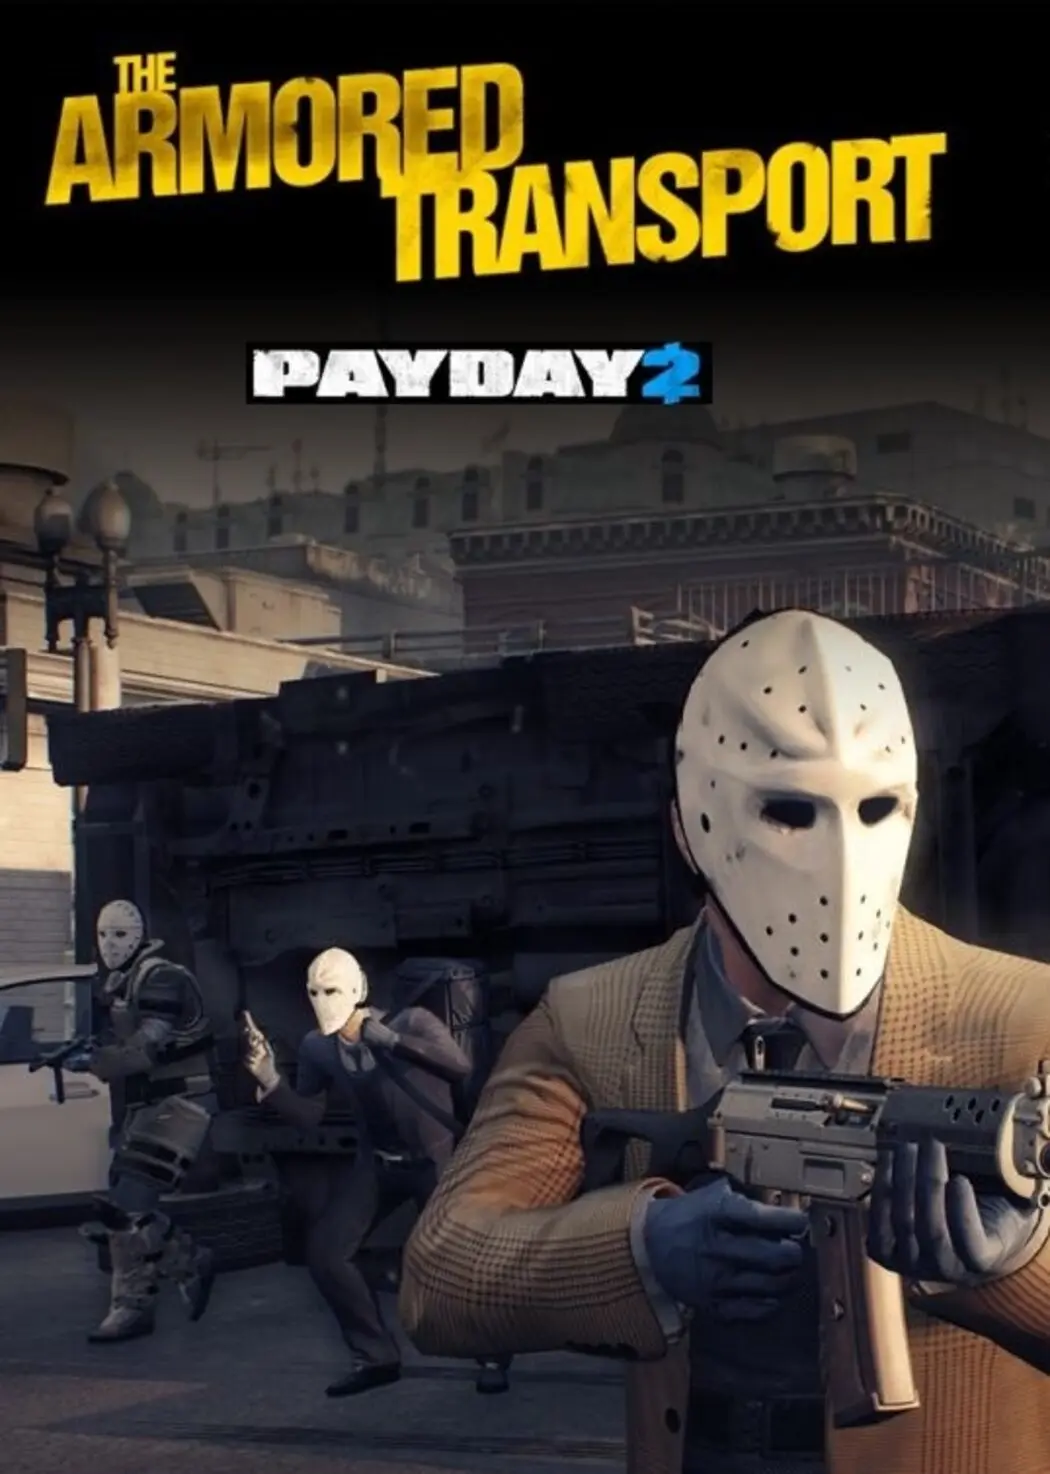 Payday 2 - Ultimate Steal (Armored Transport) DLC (EU) (PC) - Steam - Digital Code